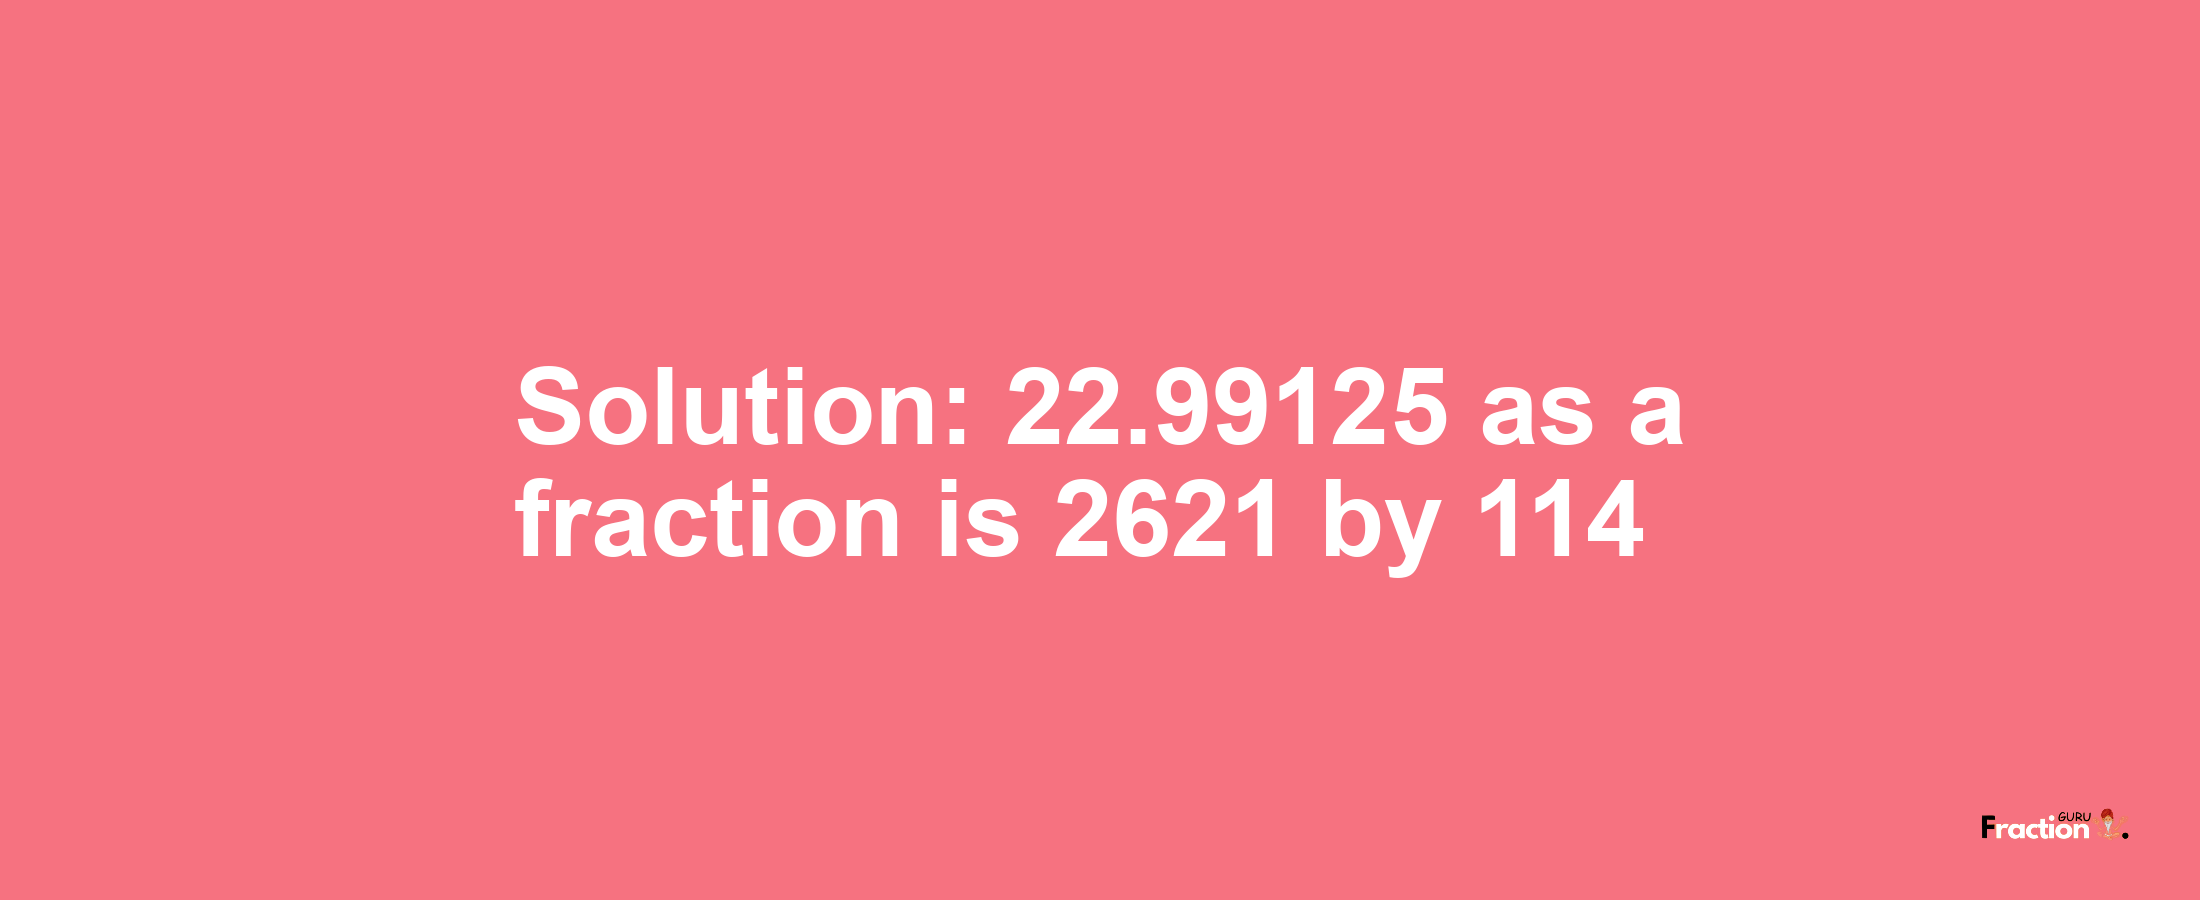 Solution:22.99125 as a fraction is 2621/114